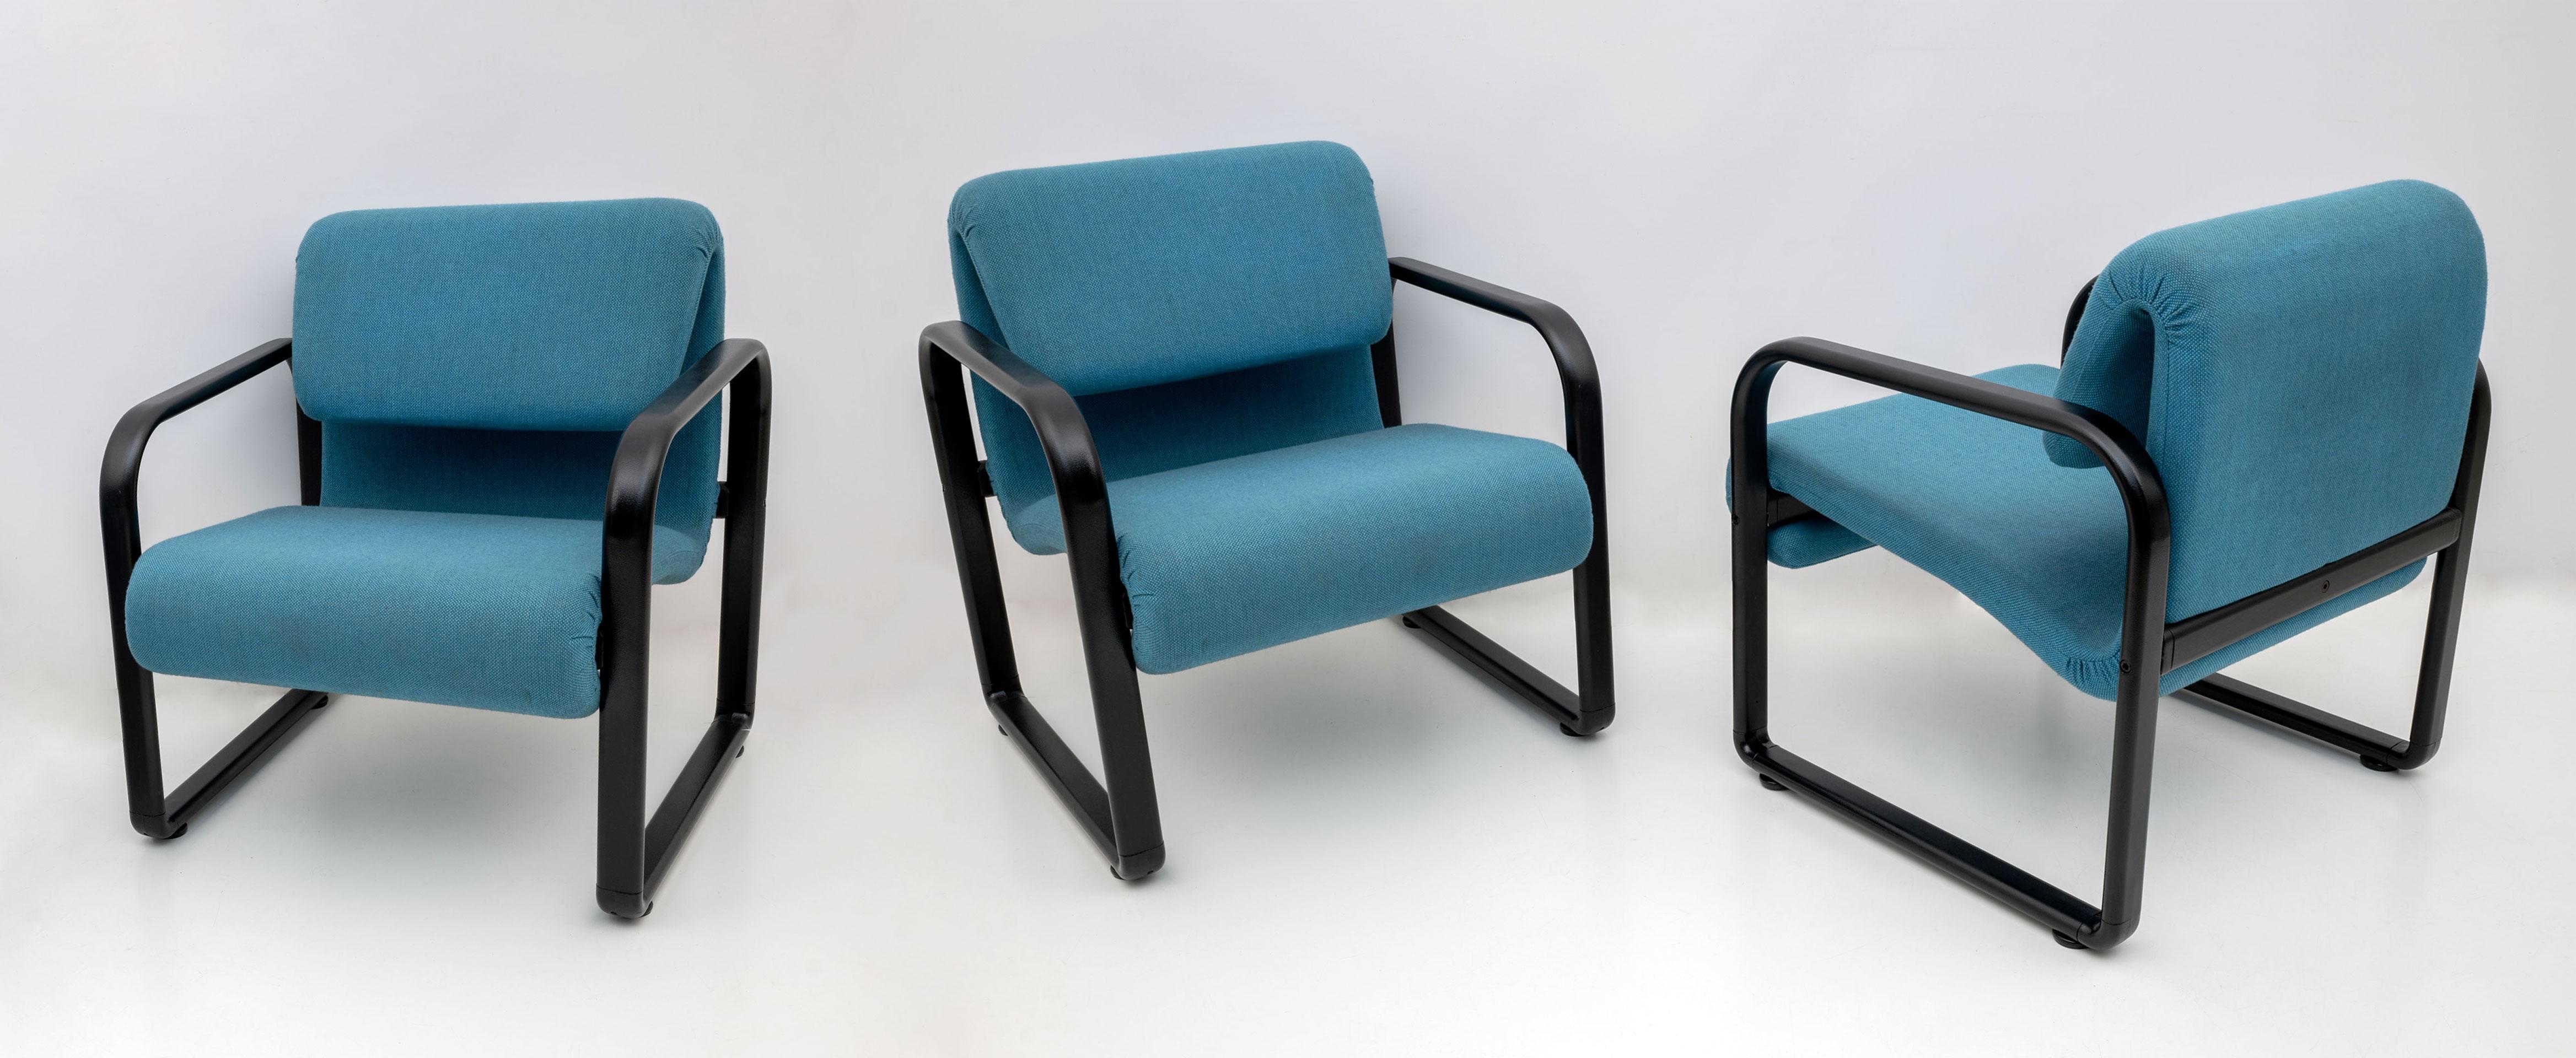 Three 1970s design armchairs in black lacquered iron and seat in removable blue fabric. Produced by the famous Italian company Artflex.

Three armchairs available, the price refers to each.
The shipping price is for all three armchairs.